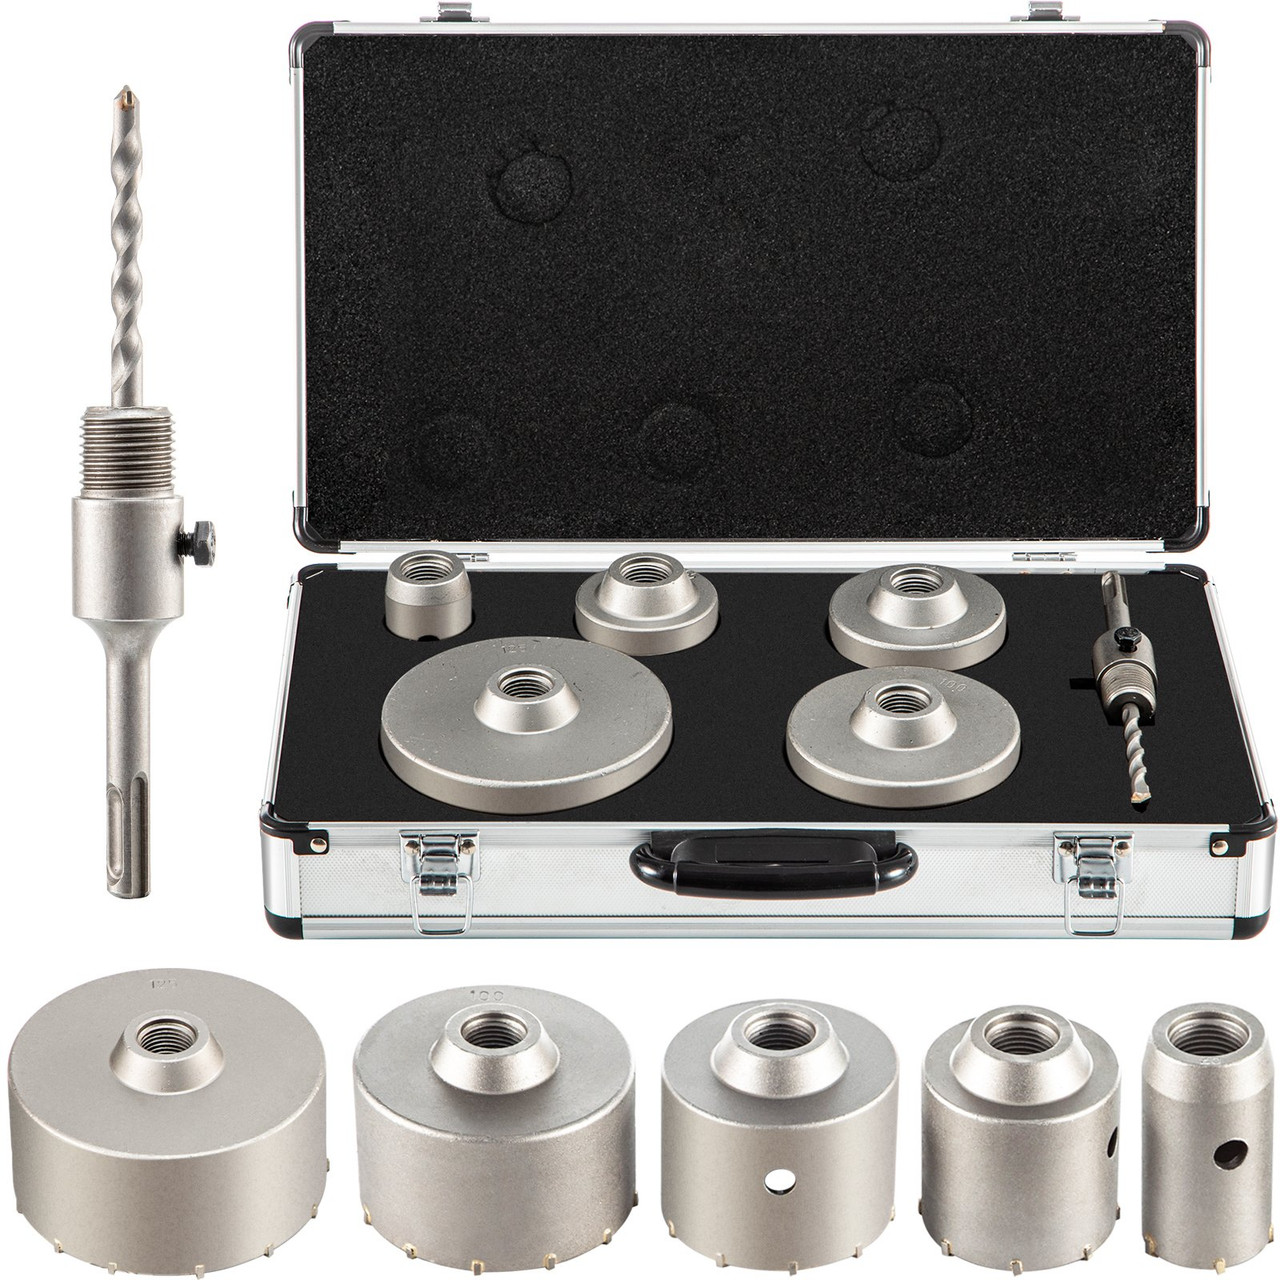 Deluxe Jewelers Saw with 4 Depth and Tensioner Screw